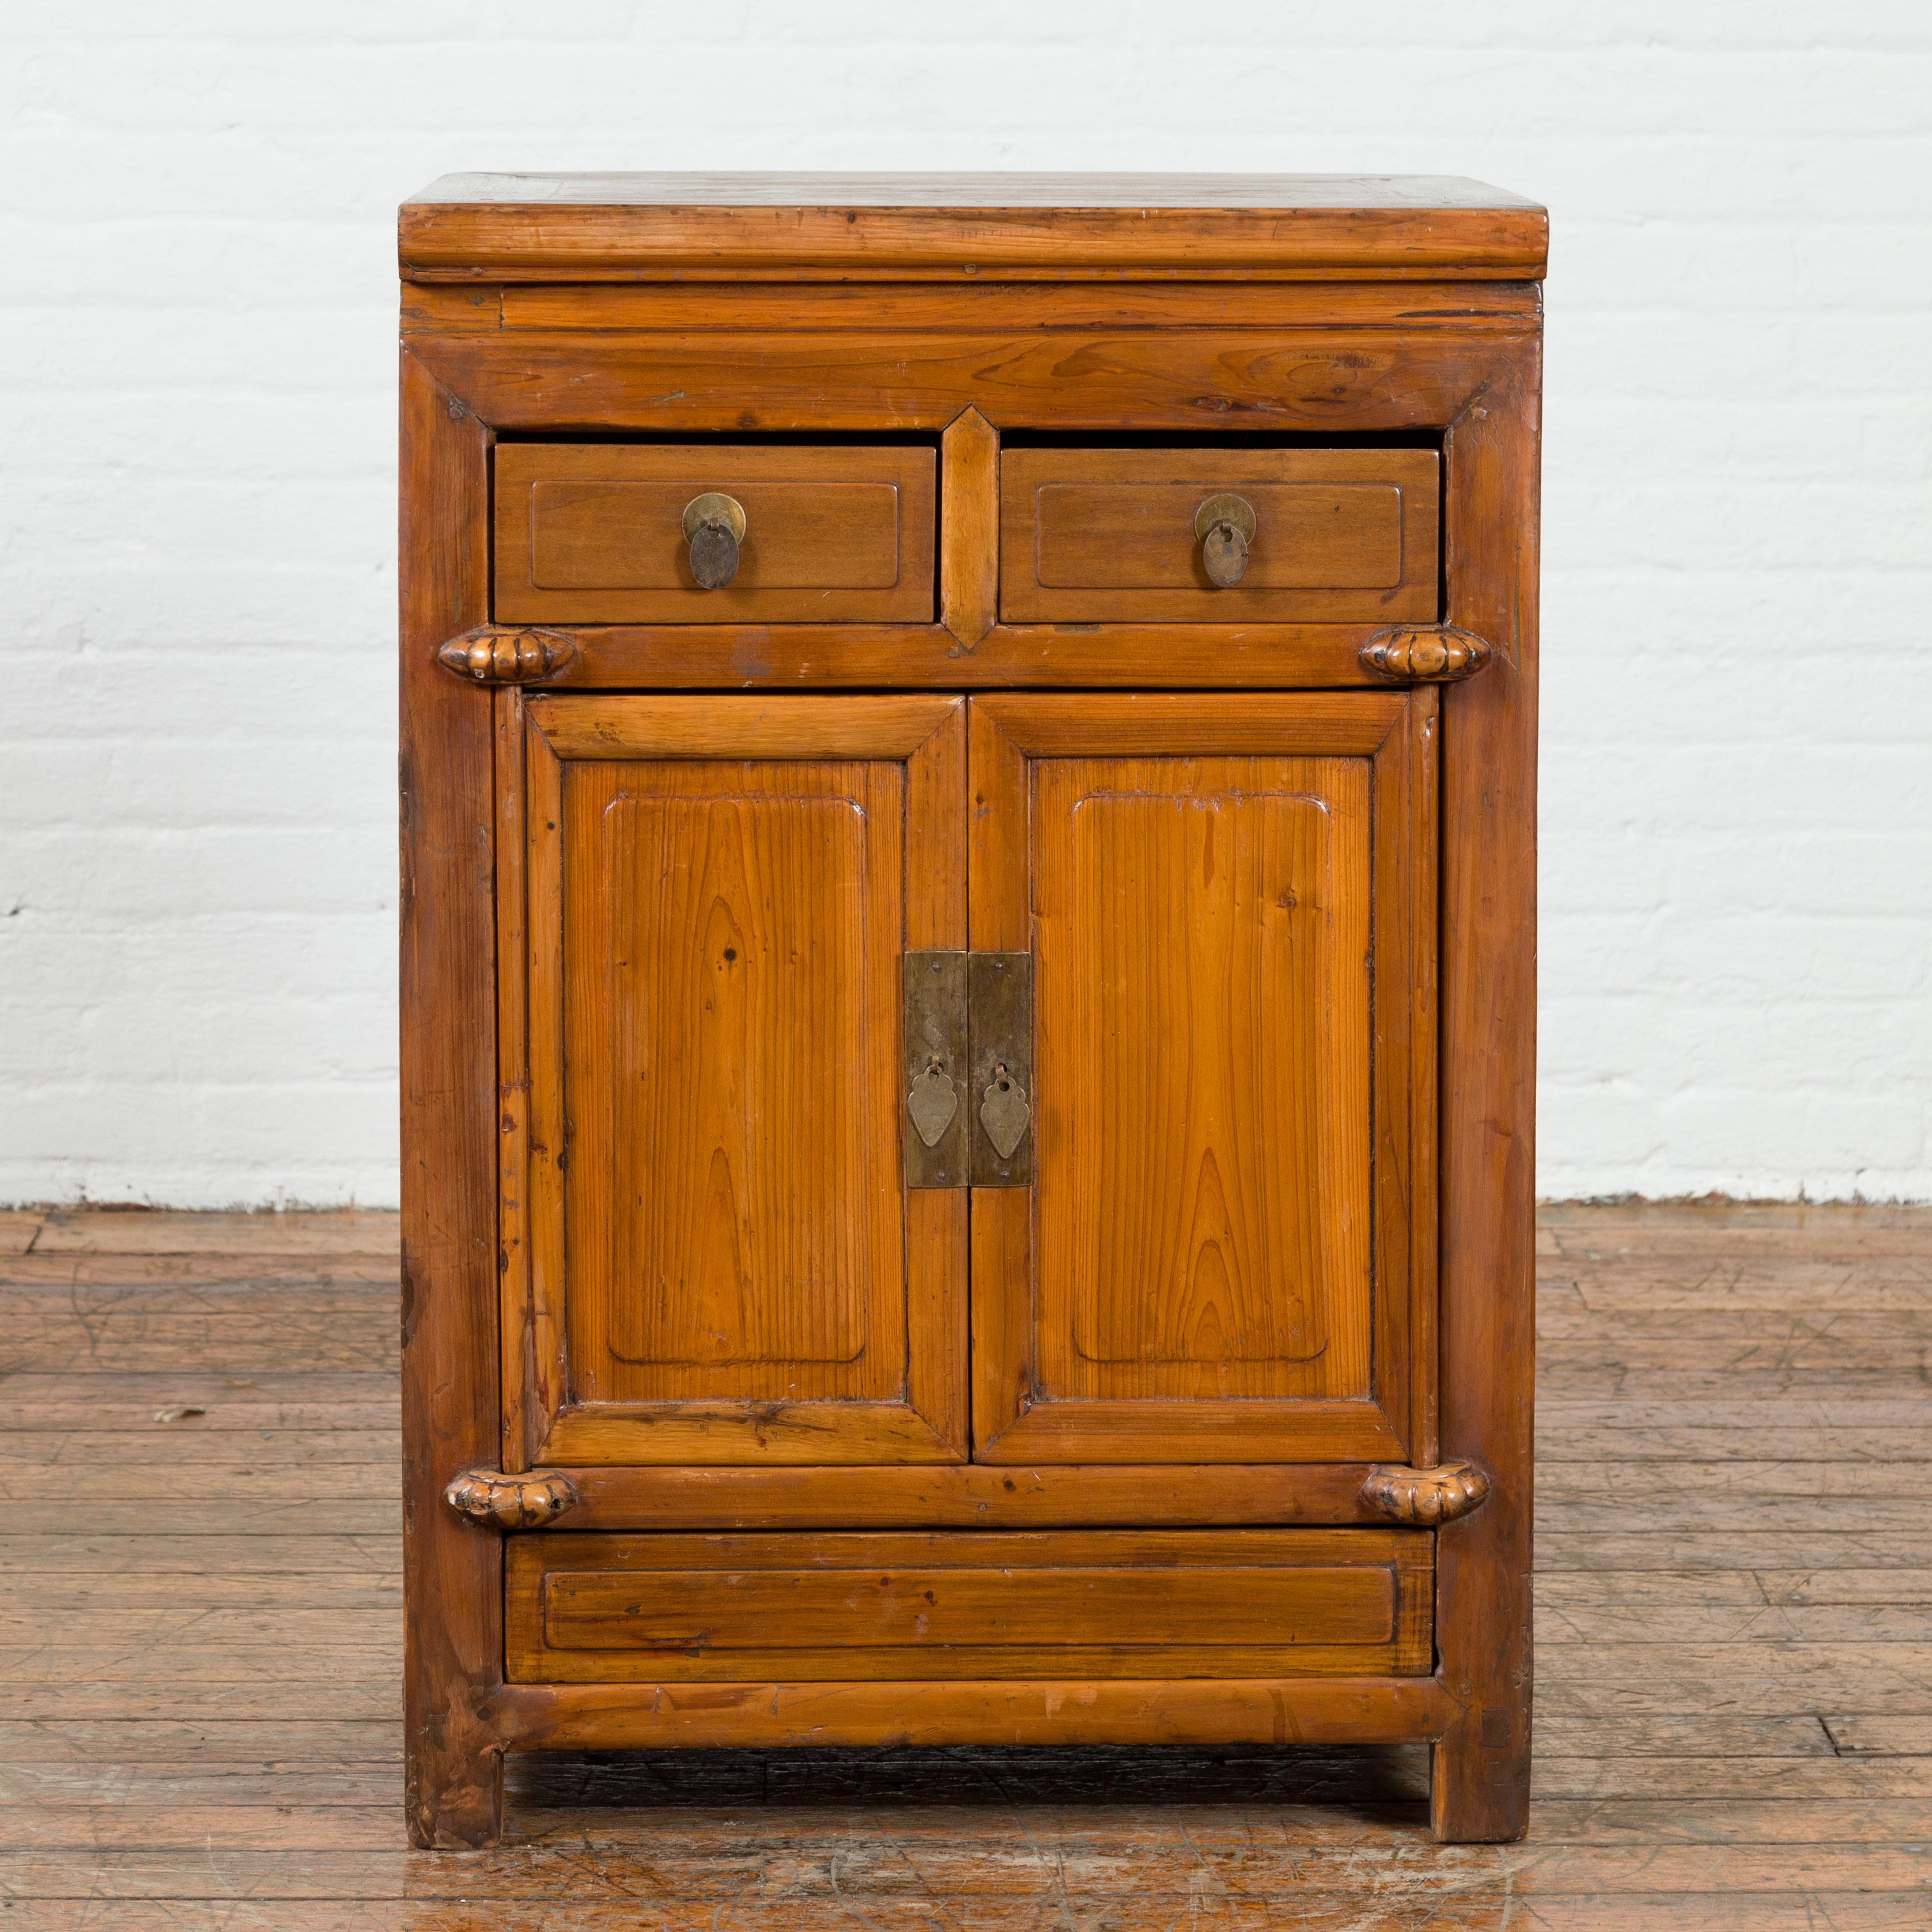 A vintage Chinese elmwood side cabinet from the mid 20th century with two drawers sitting above two doors. Our mid century vintage cabinet features a rectangular top that offers room for you to style with decorative accent pieces or statuettes. Two